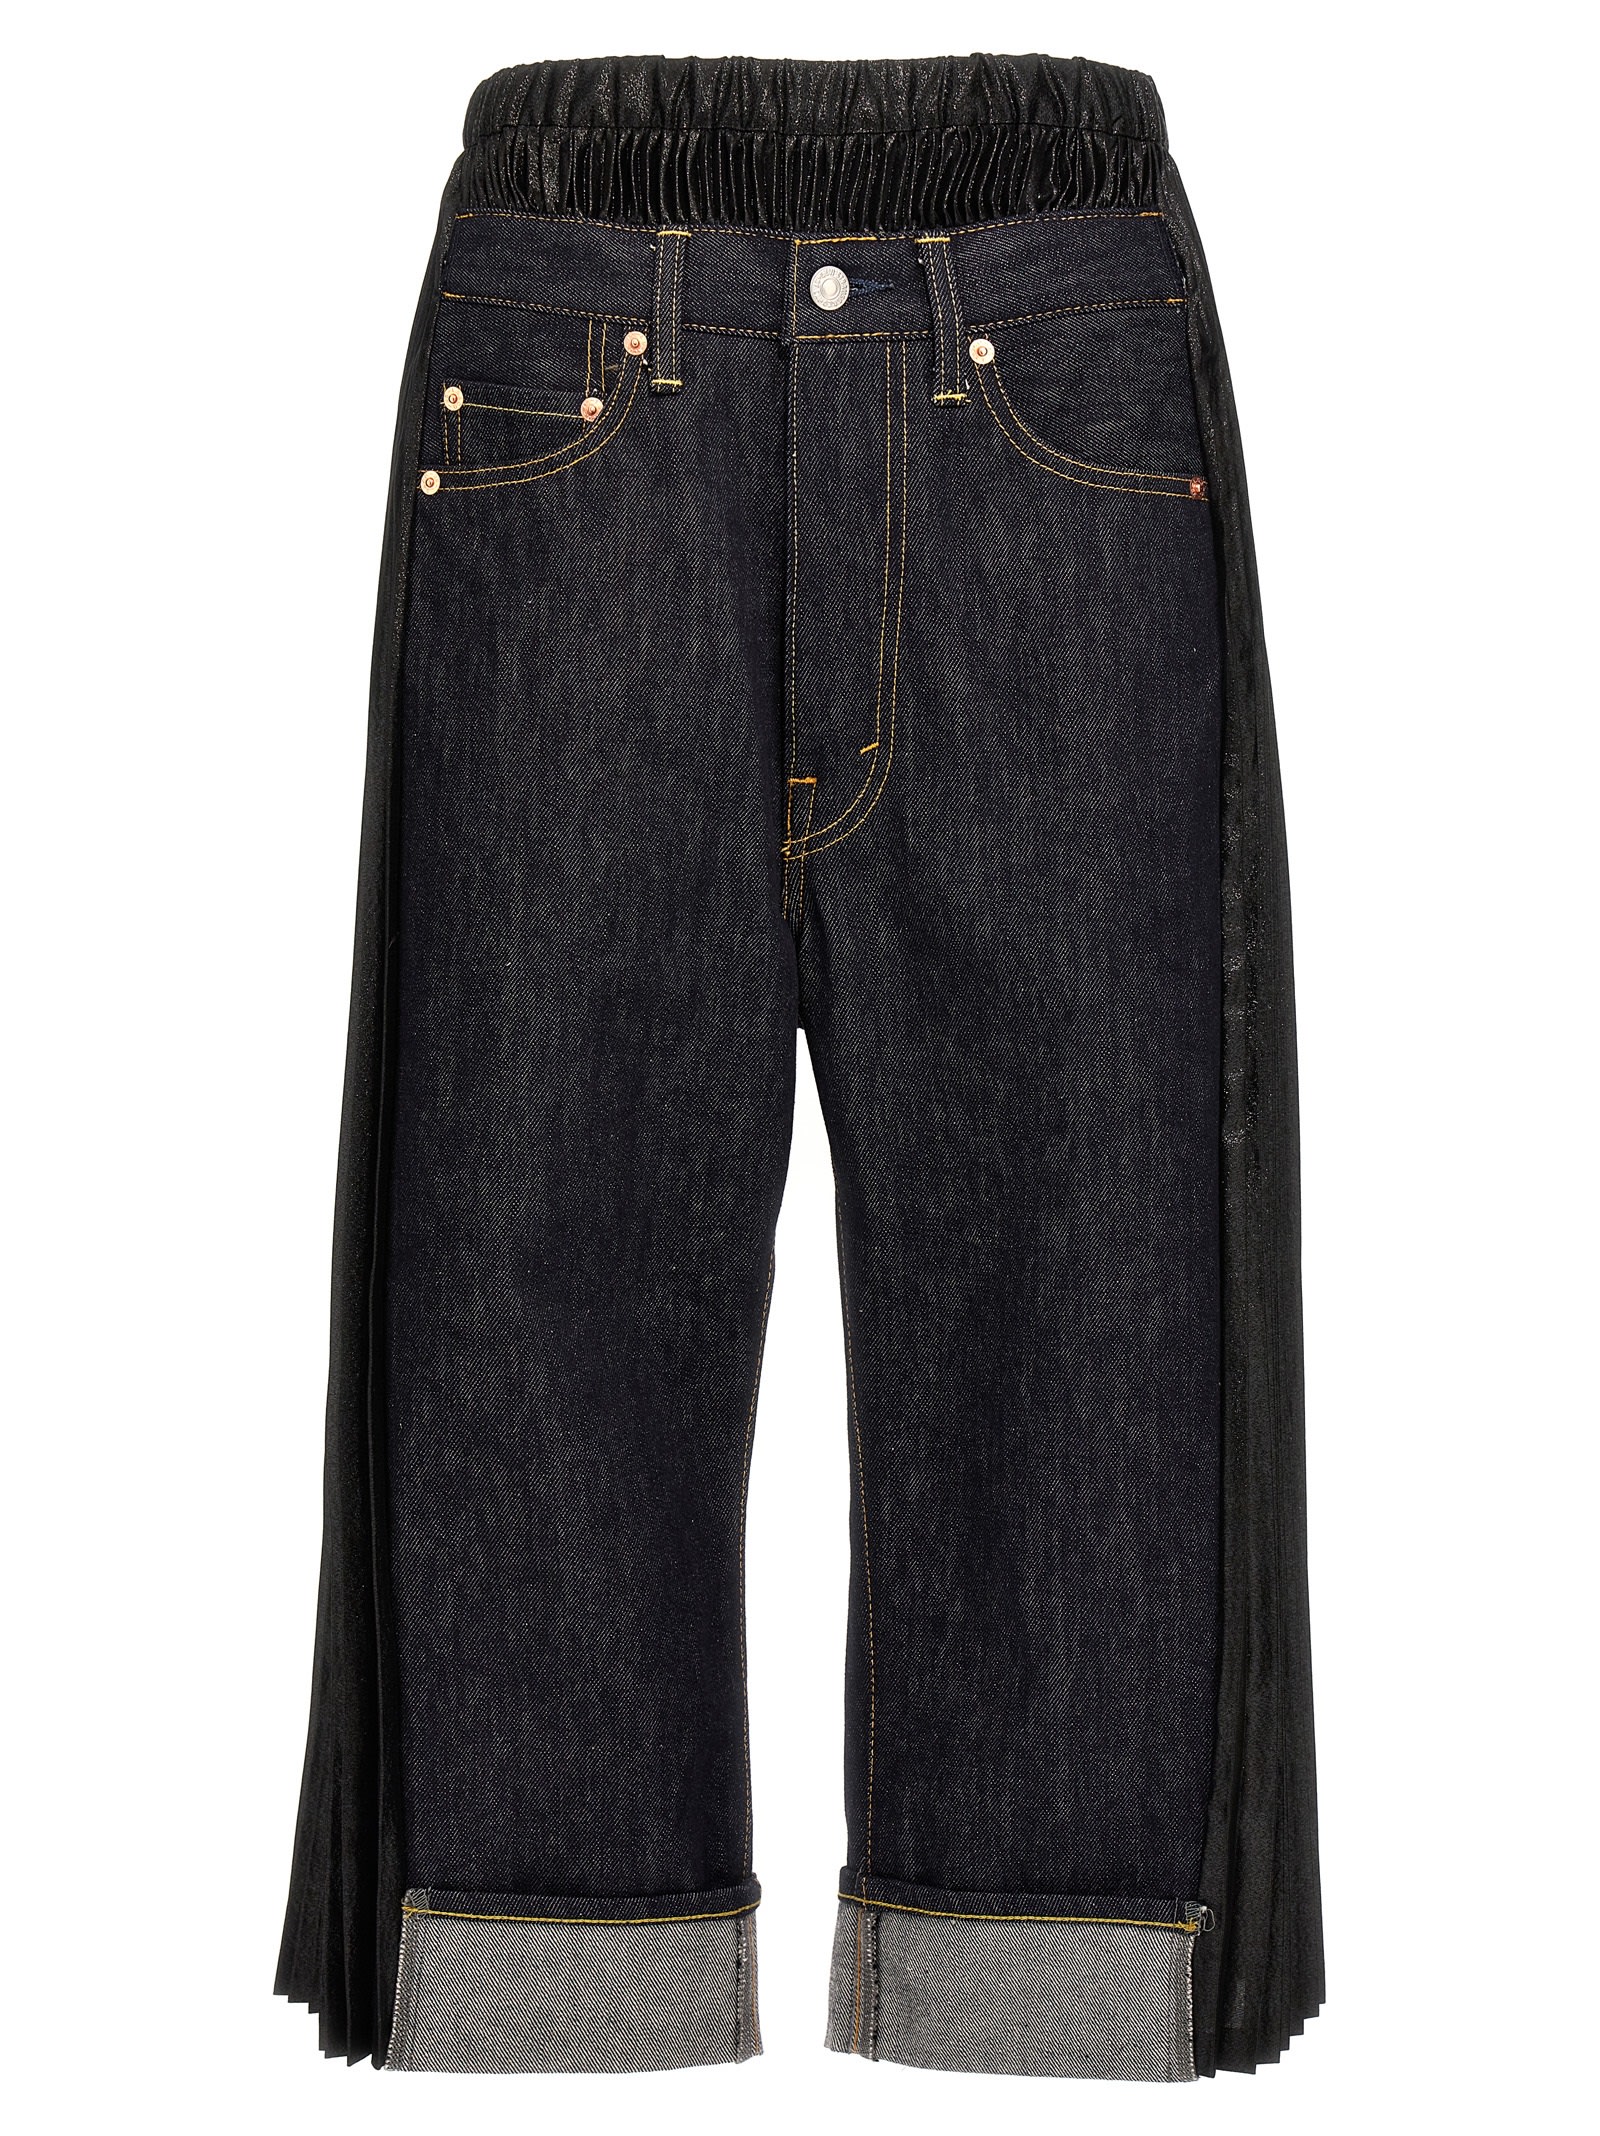 X Levis Pleated Insert Jeans